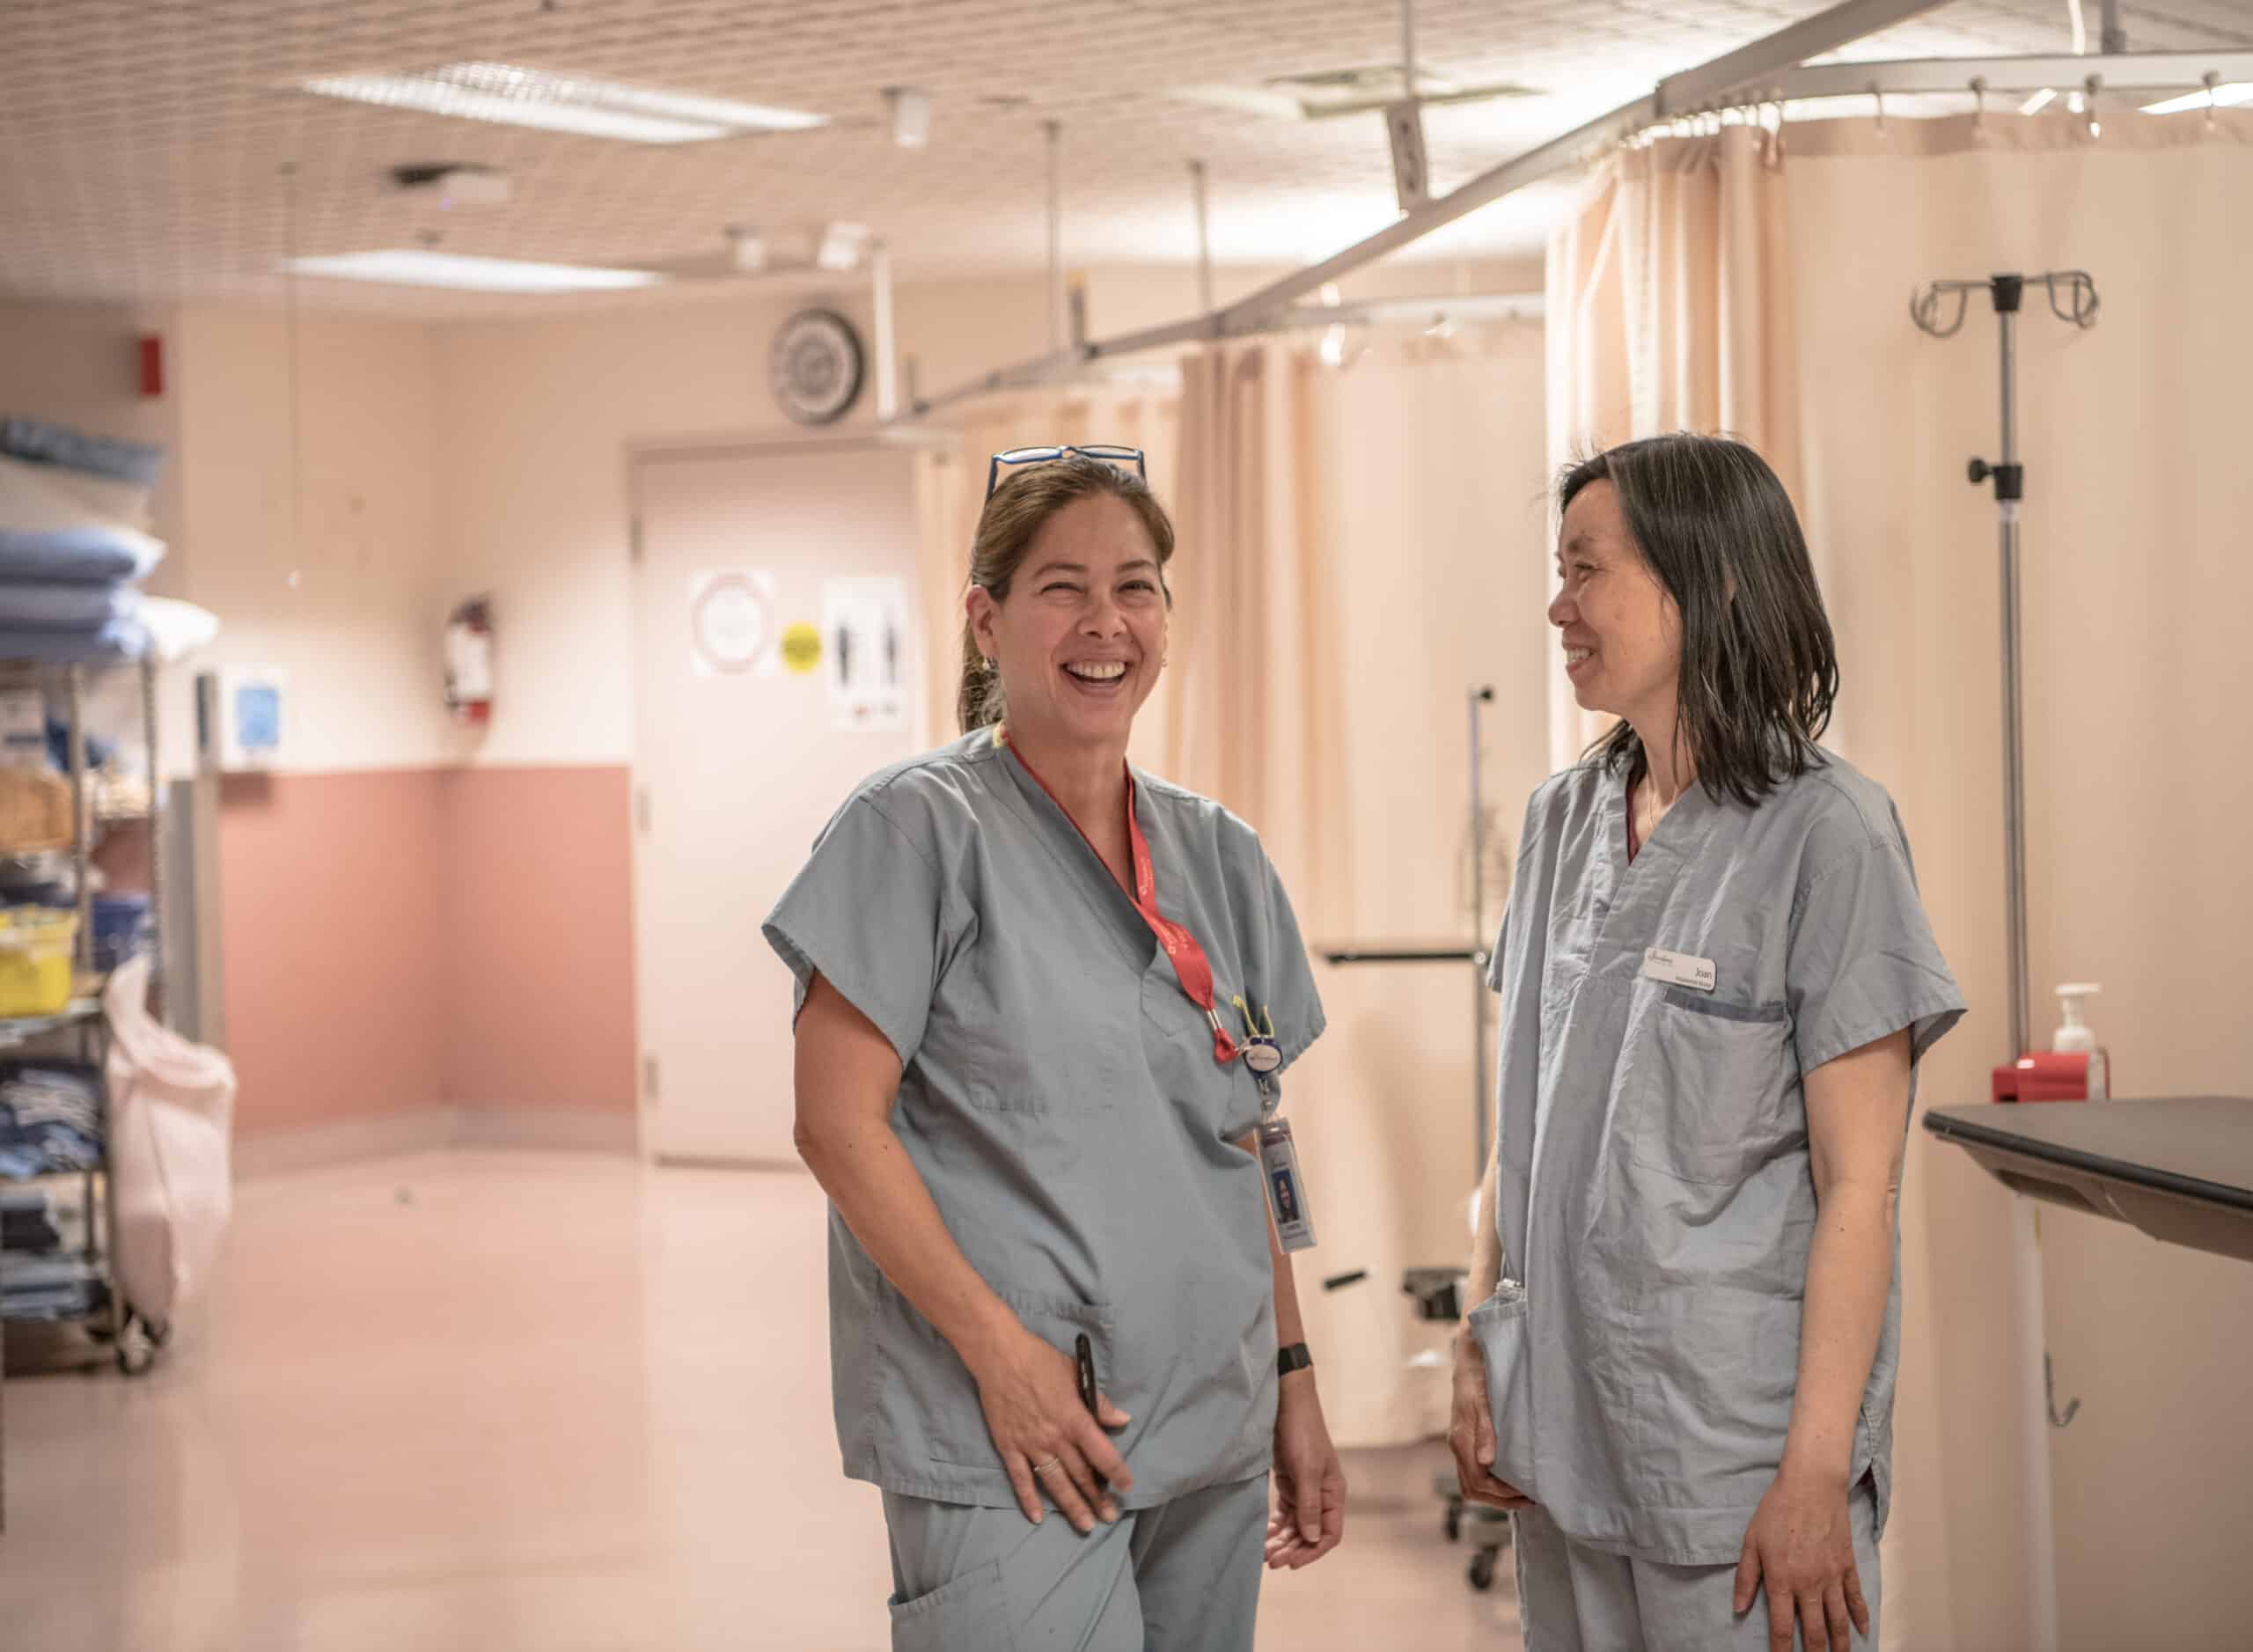 Image of two nurses wearing scrubs and smiling